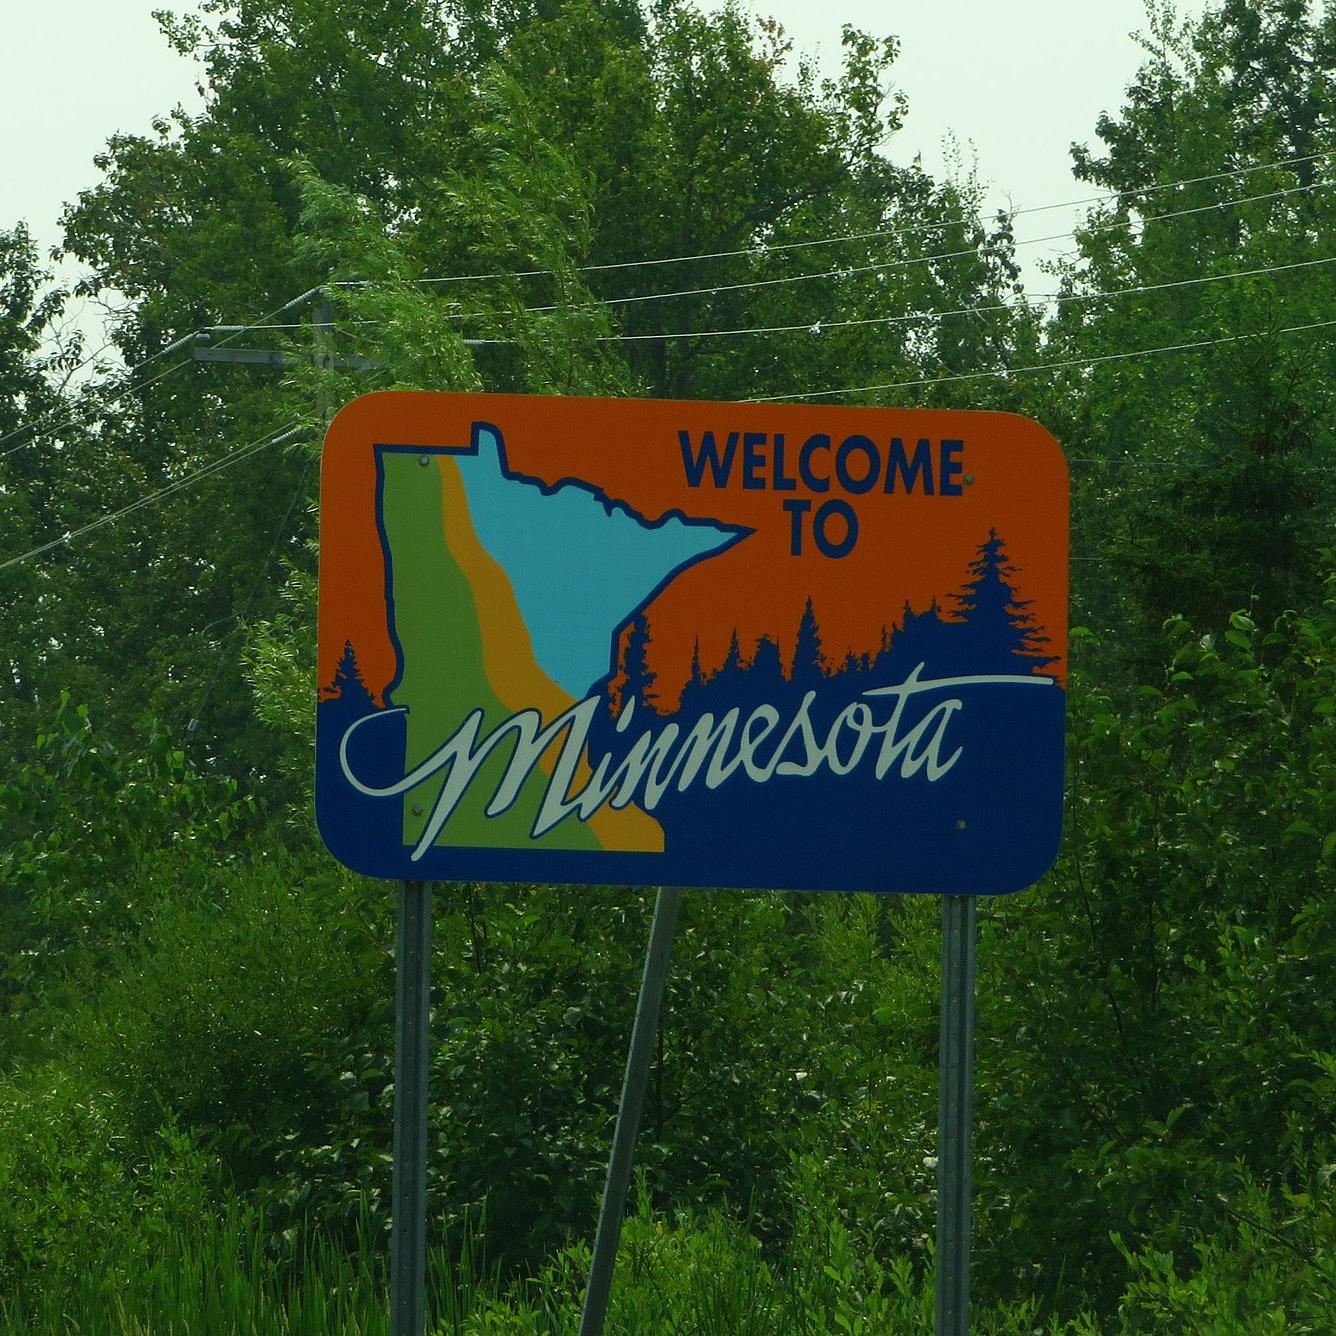 Welcome to Minnesota sign in northern Minnesota